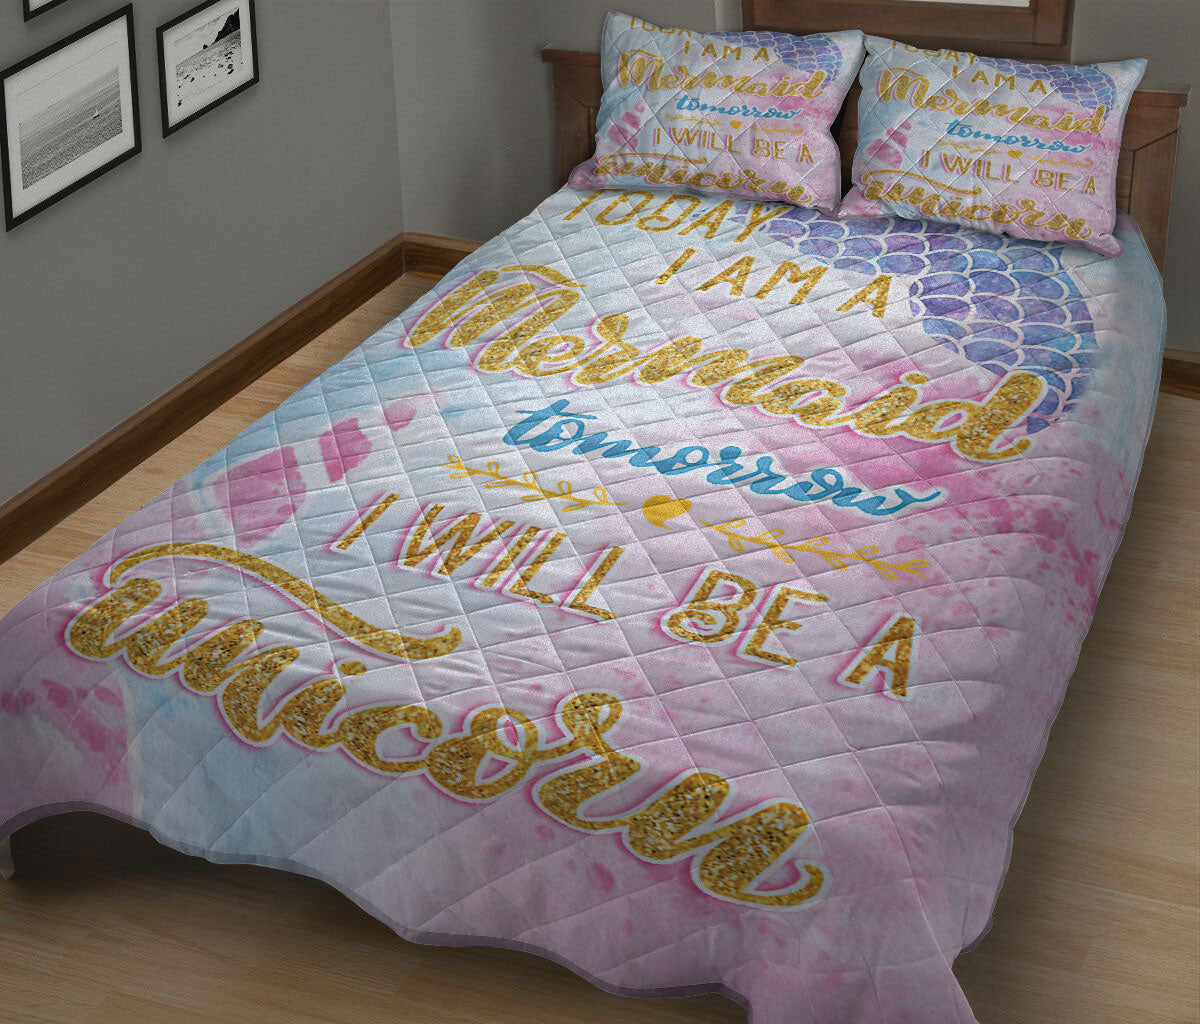 Ohaprints-Quilt-Bed-Set-Pillowcase-Sea-Ocean-Beach-Mermaid-Tail-Unicorn-Lover-Gift-Pink-Blanket-Bedspread-Bedding-2686-King (90'' x 100'')